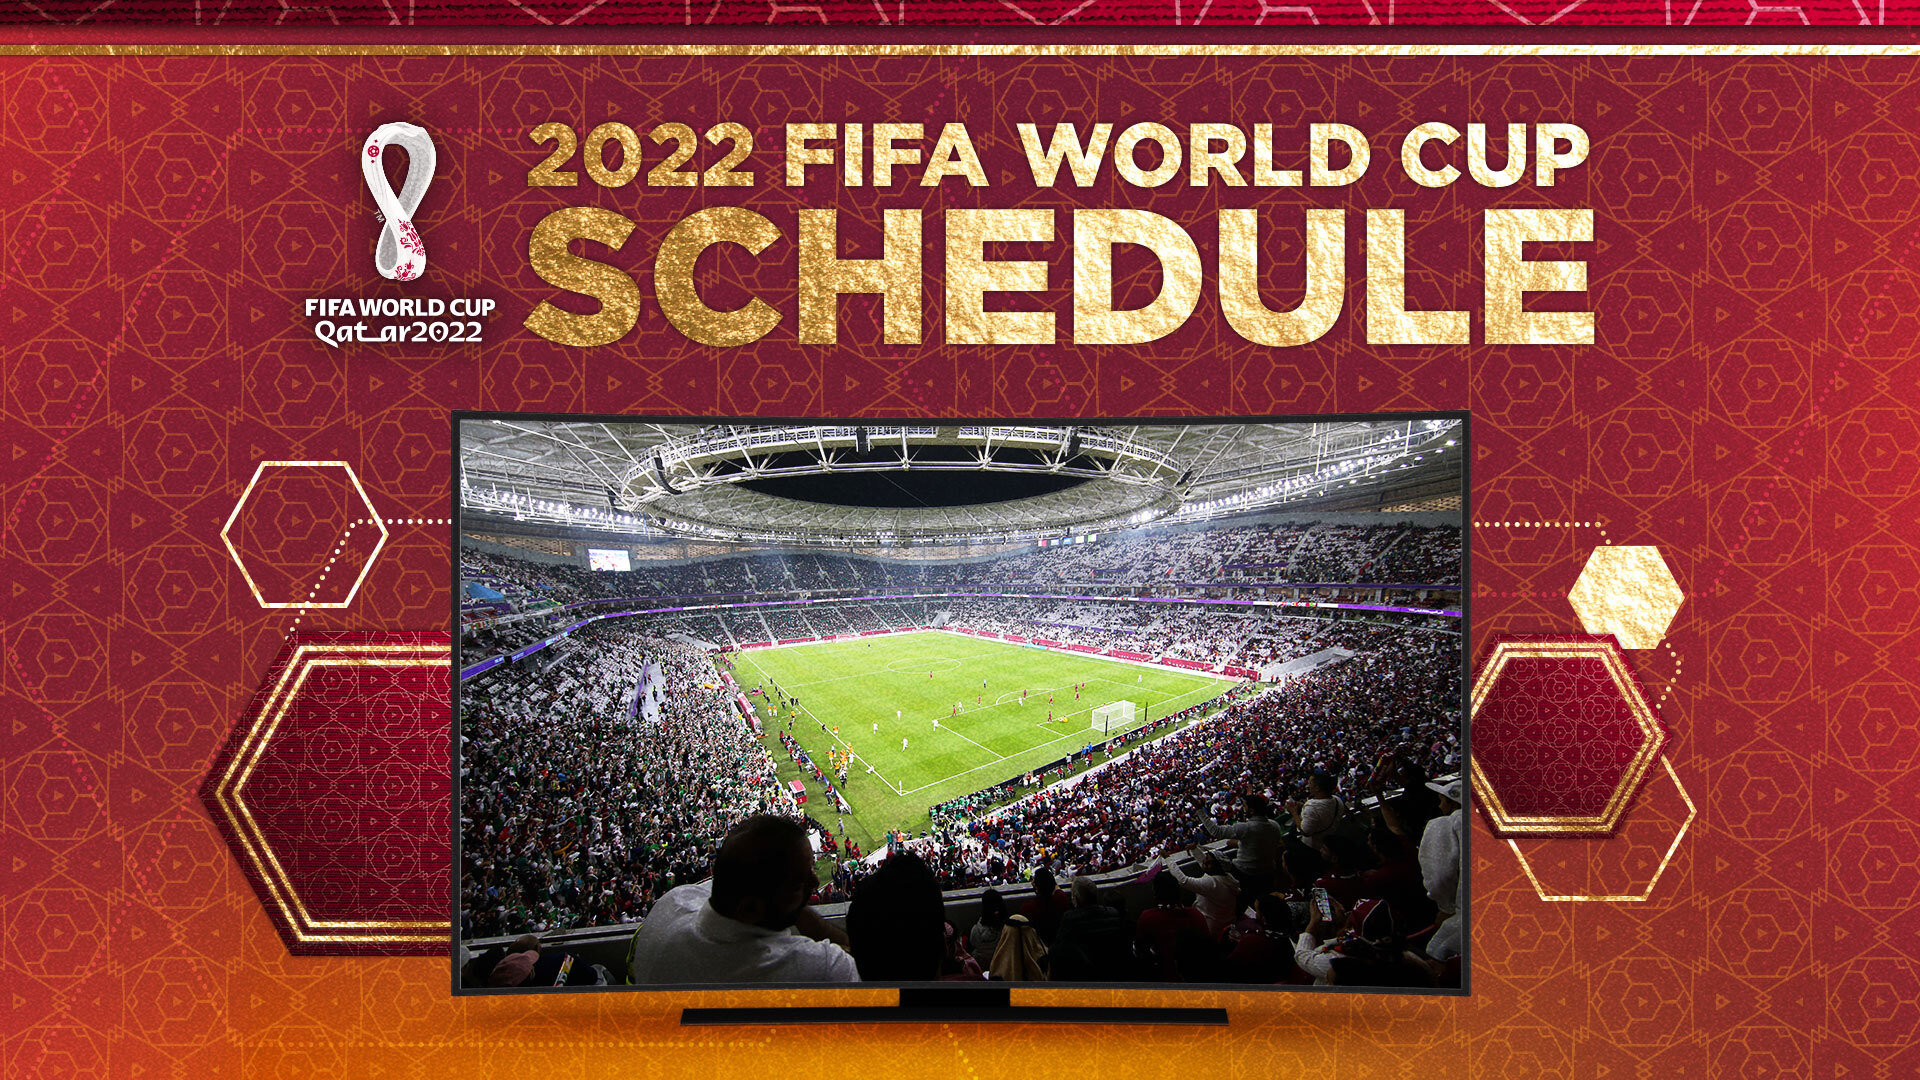 How to watch the 2022 World Cup on FOX Times, channels, full match